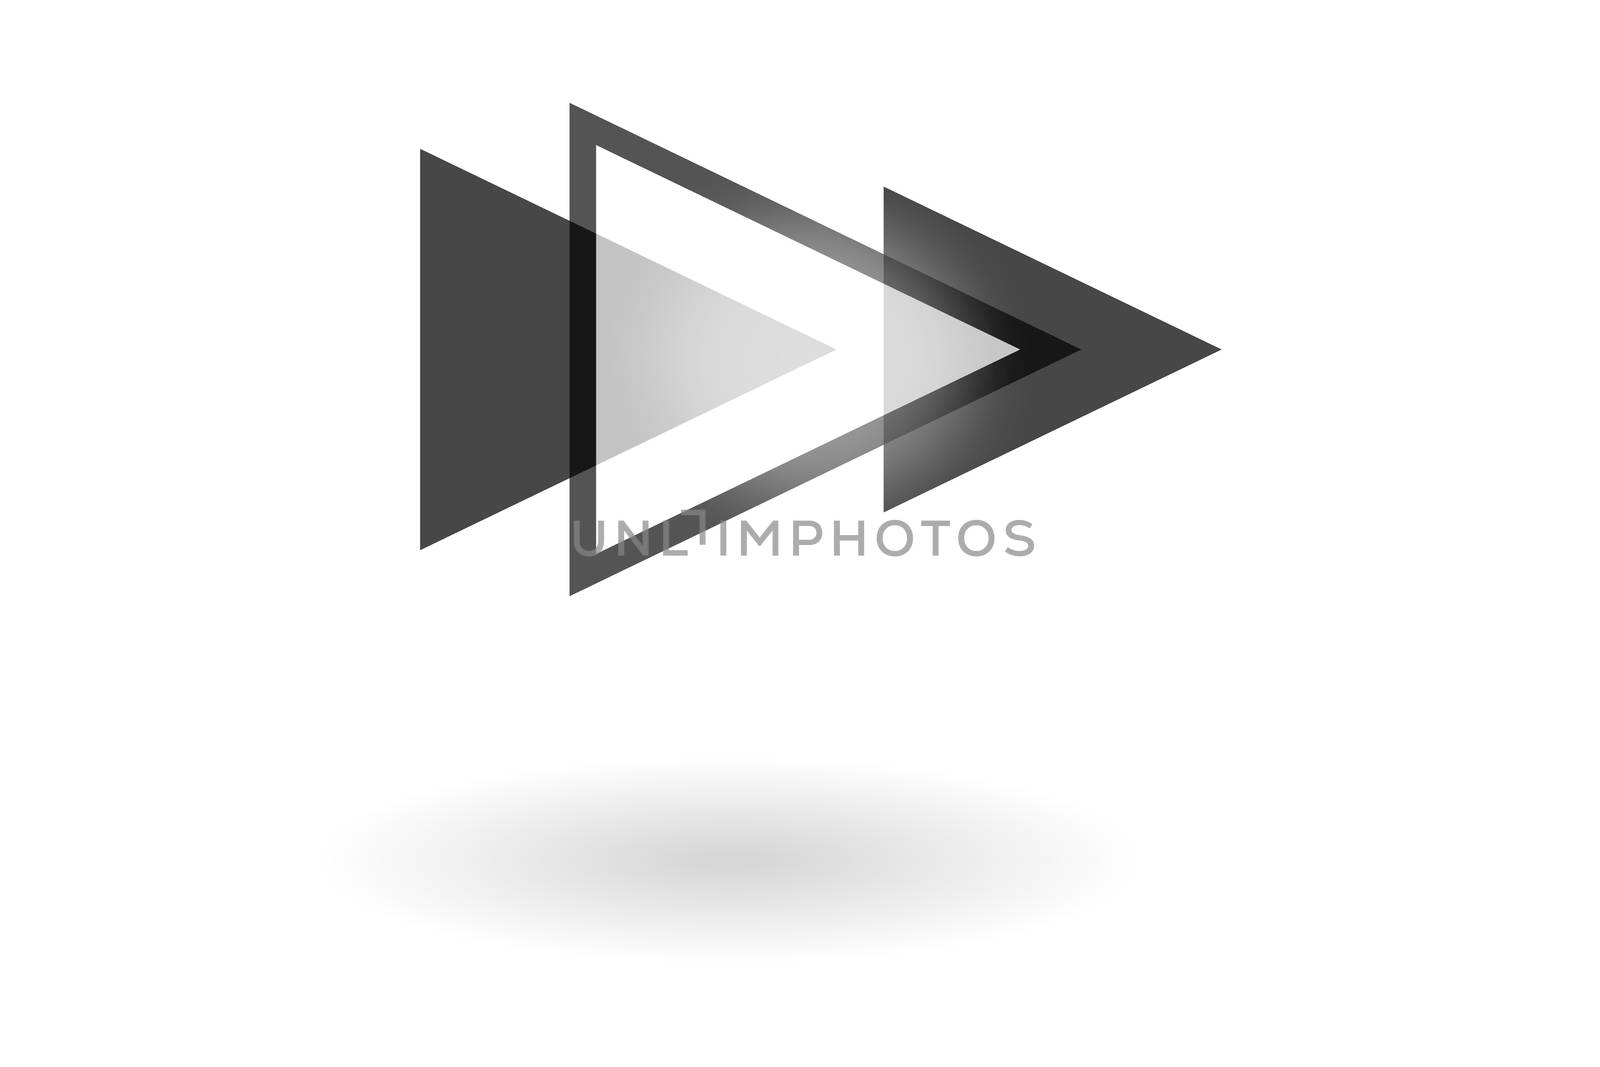 Abstract geometric pattern, monochrome play icon with triangle overlapping on white background